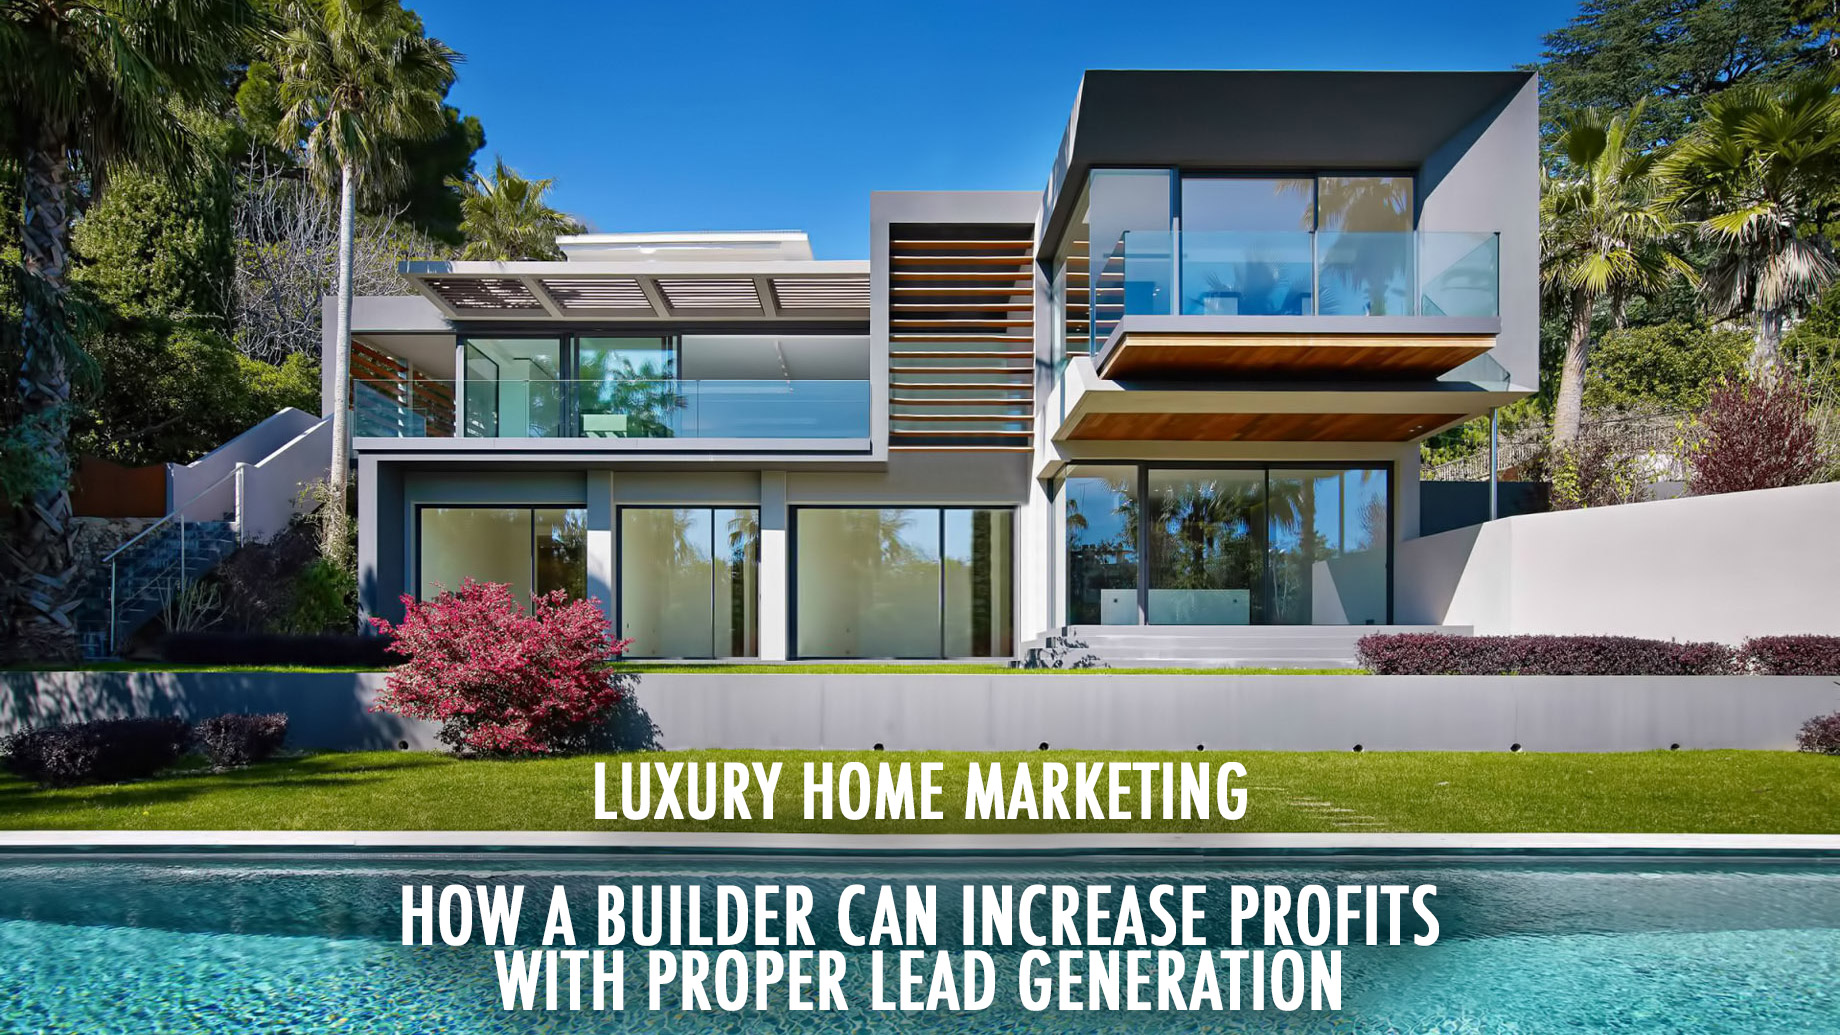 Luxury Home Marketing - How a Builder Can Increase Profits with Proper Lead Generation